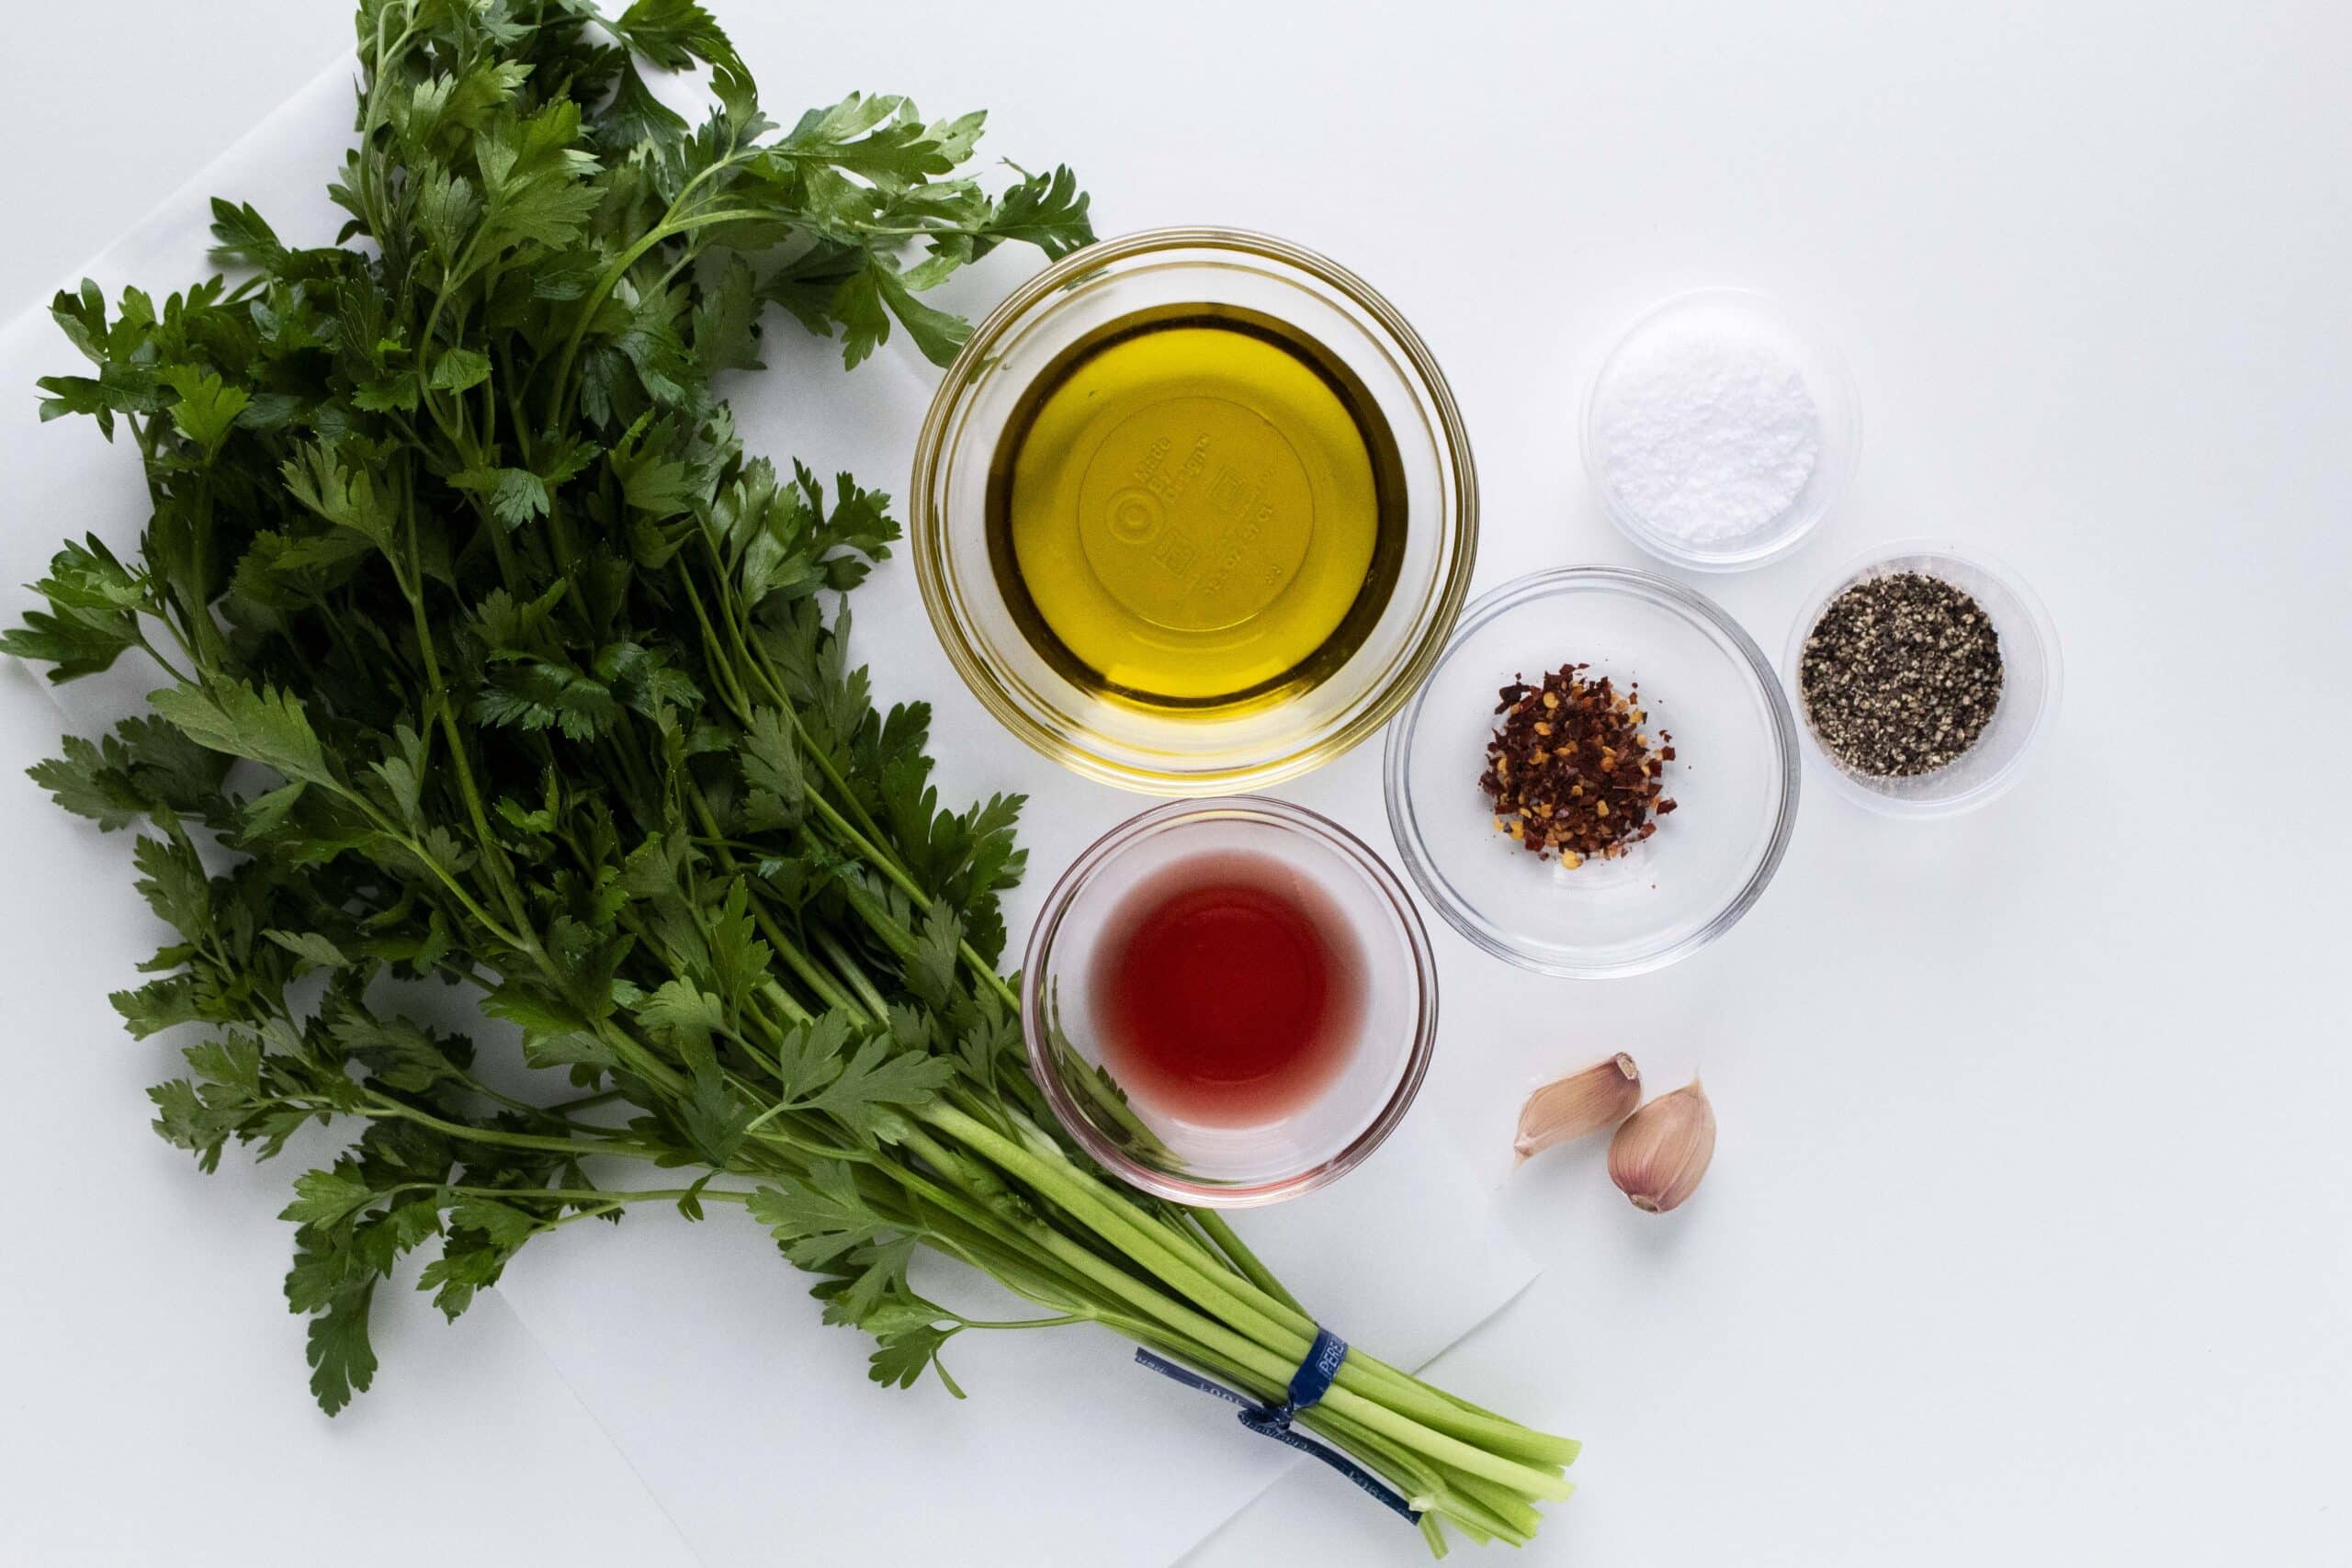 Ingredients for green chimichurri sauce on a white background.